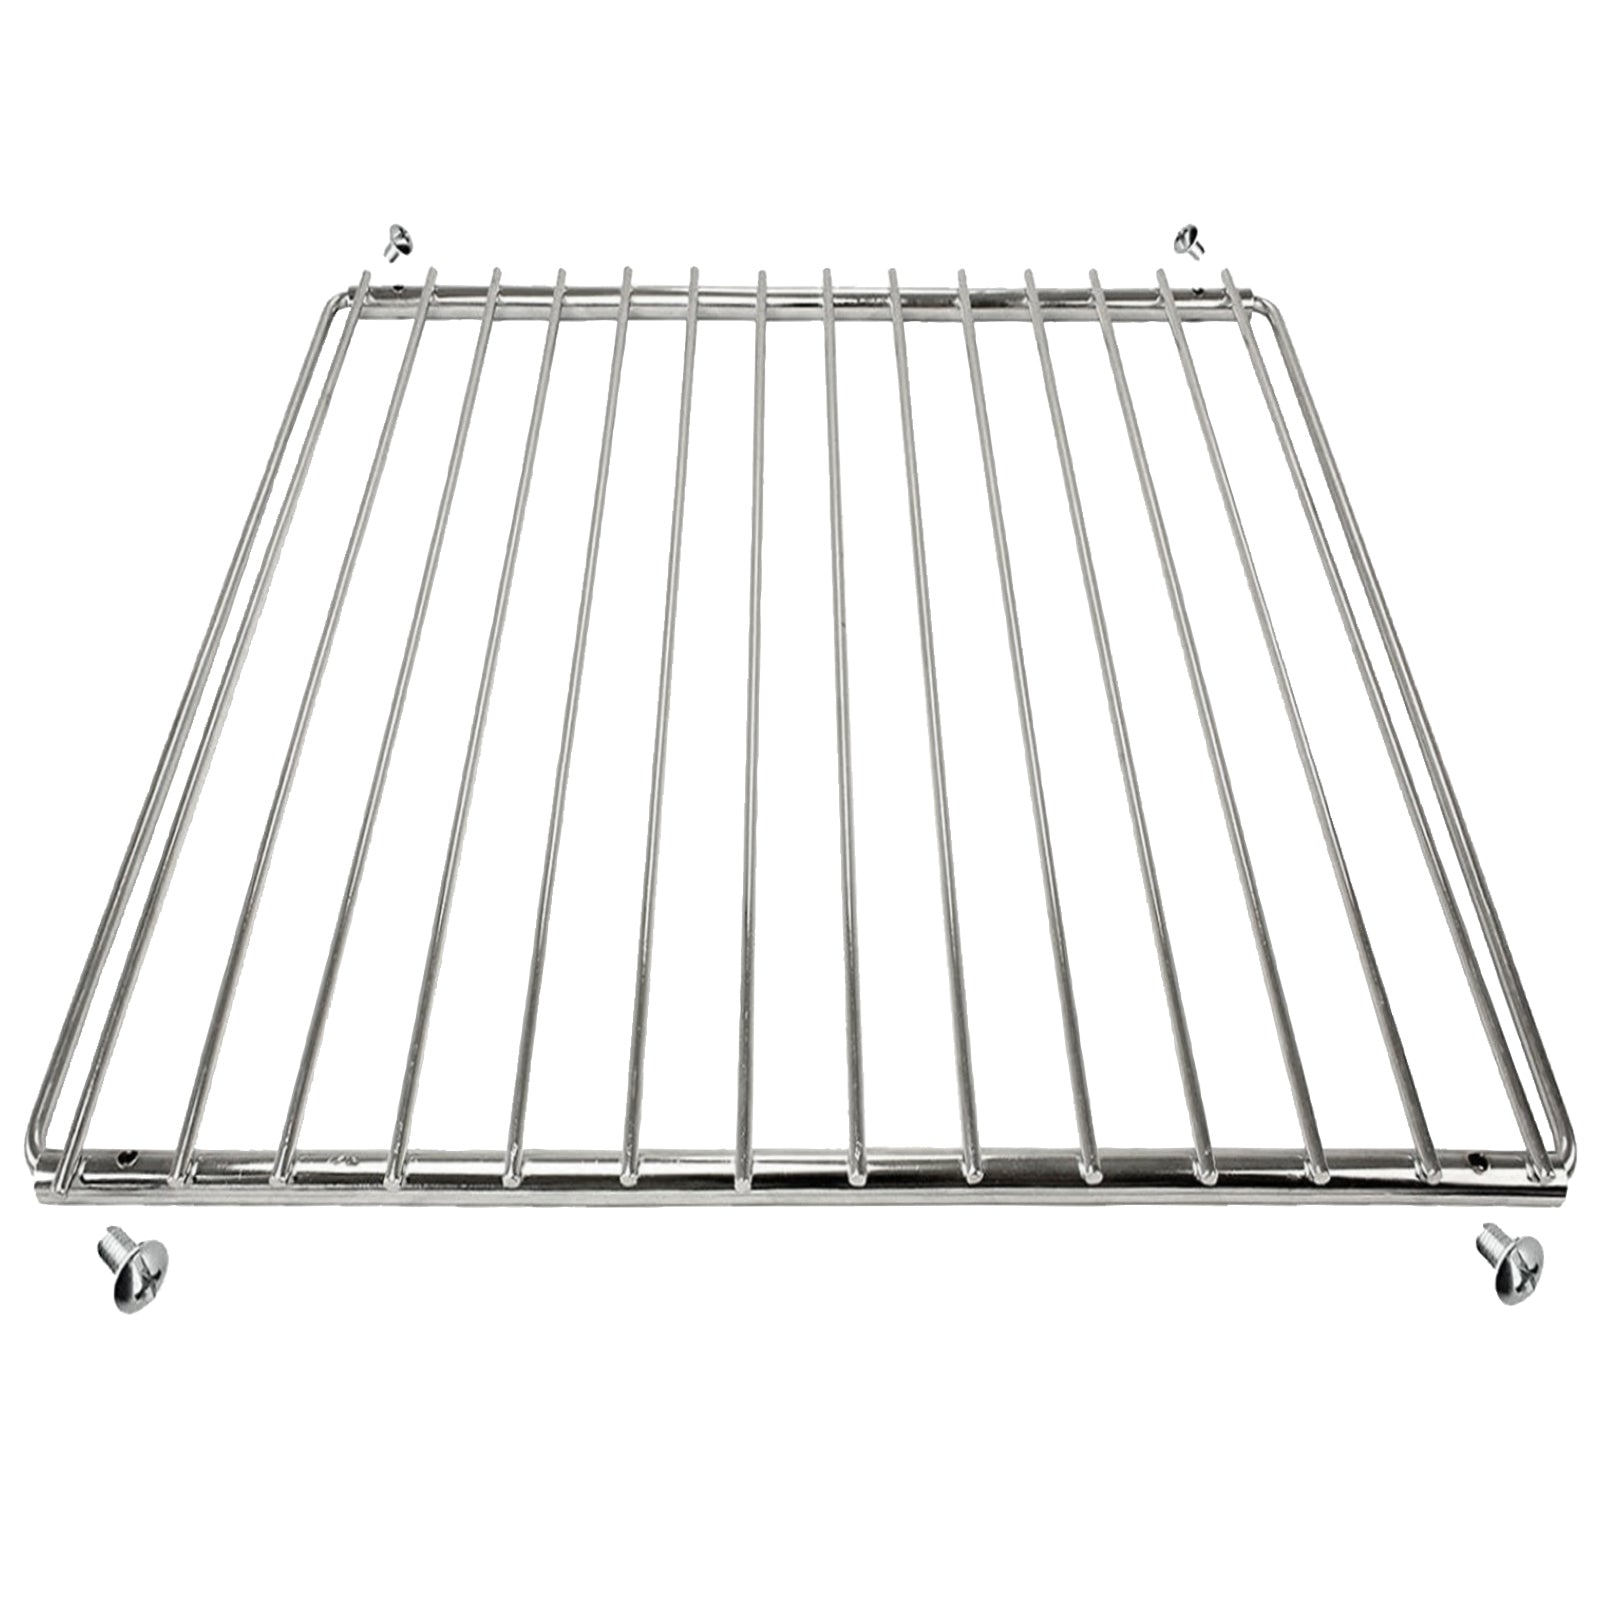 BBQ Adjustable Grill Shelf Rack Extendable Screw Fix Arms Barbecue Grid